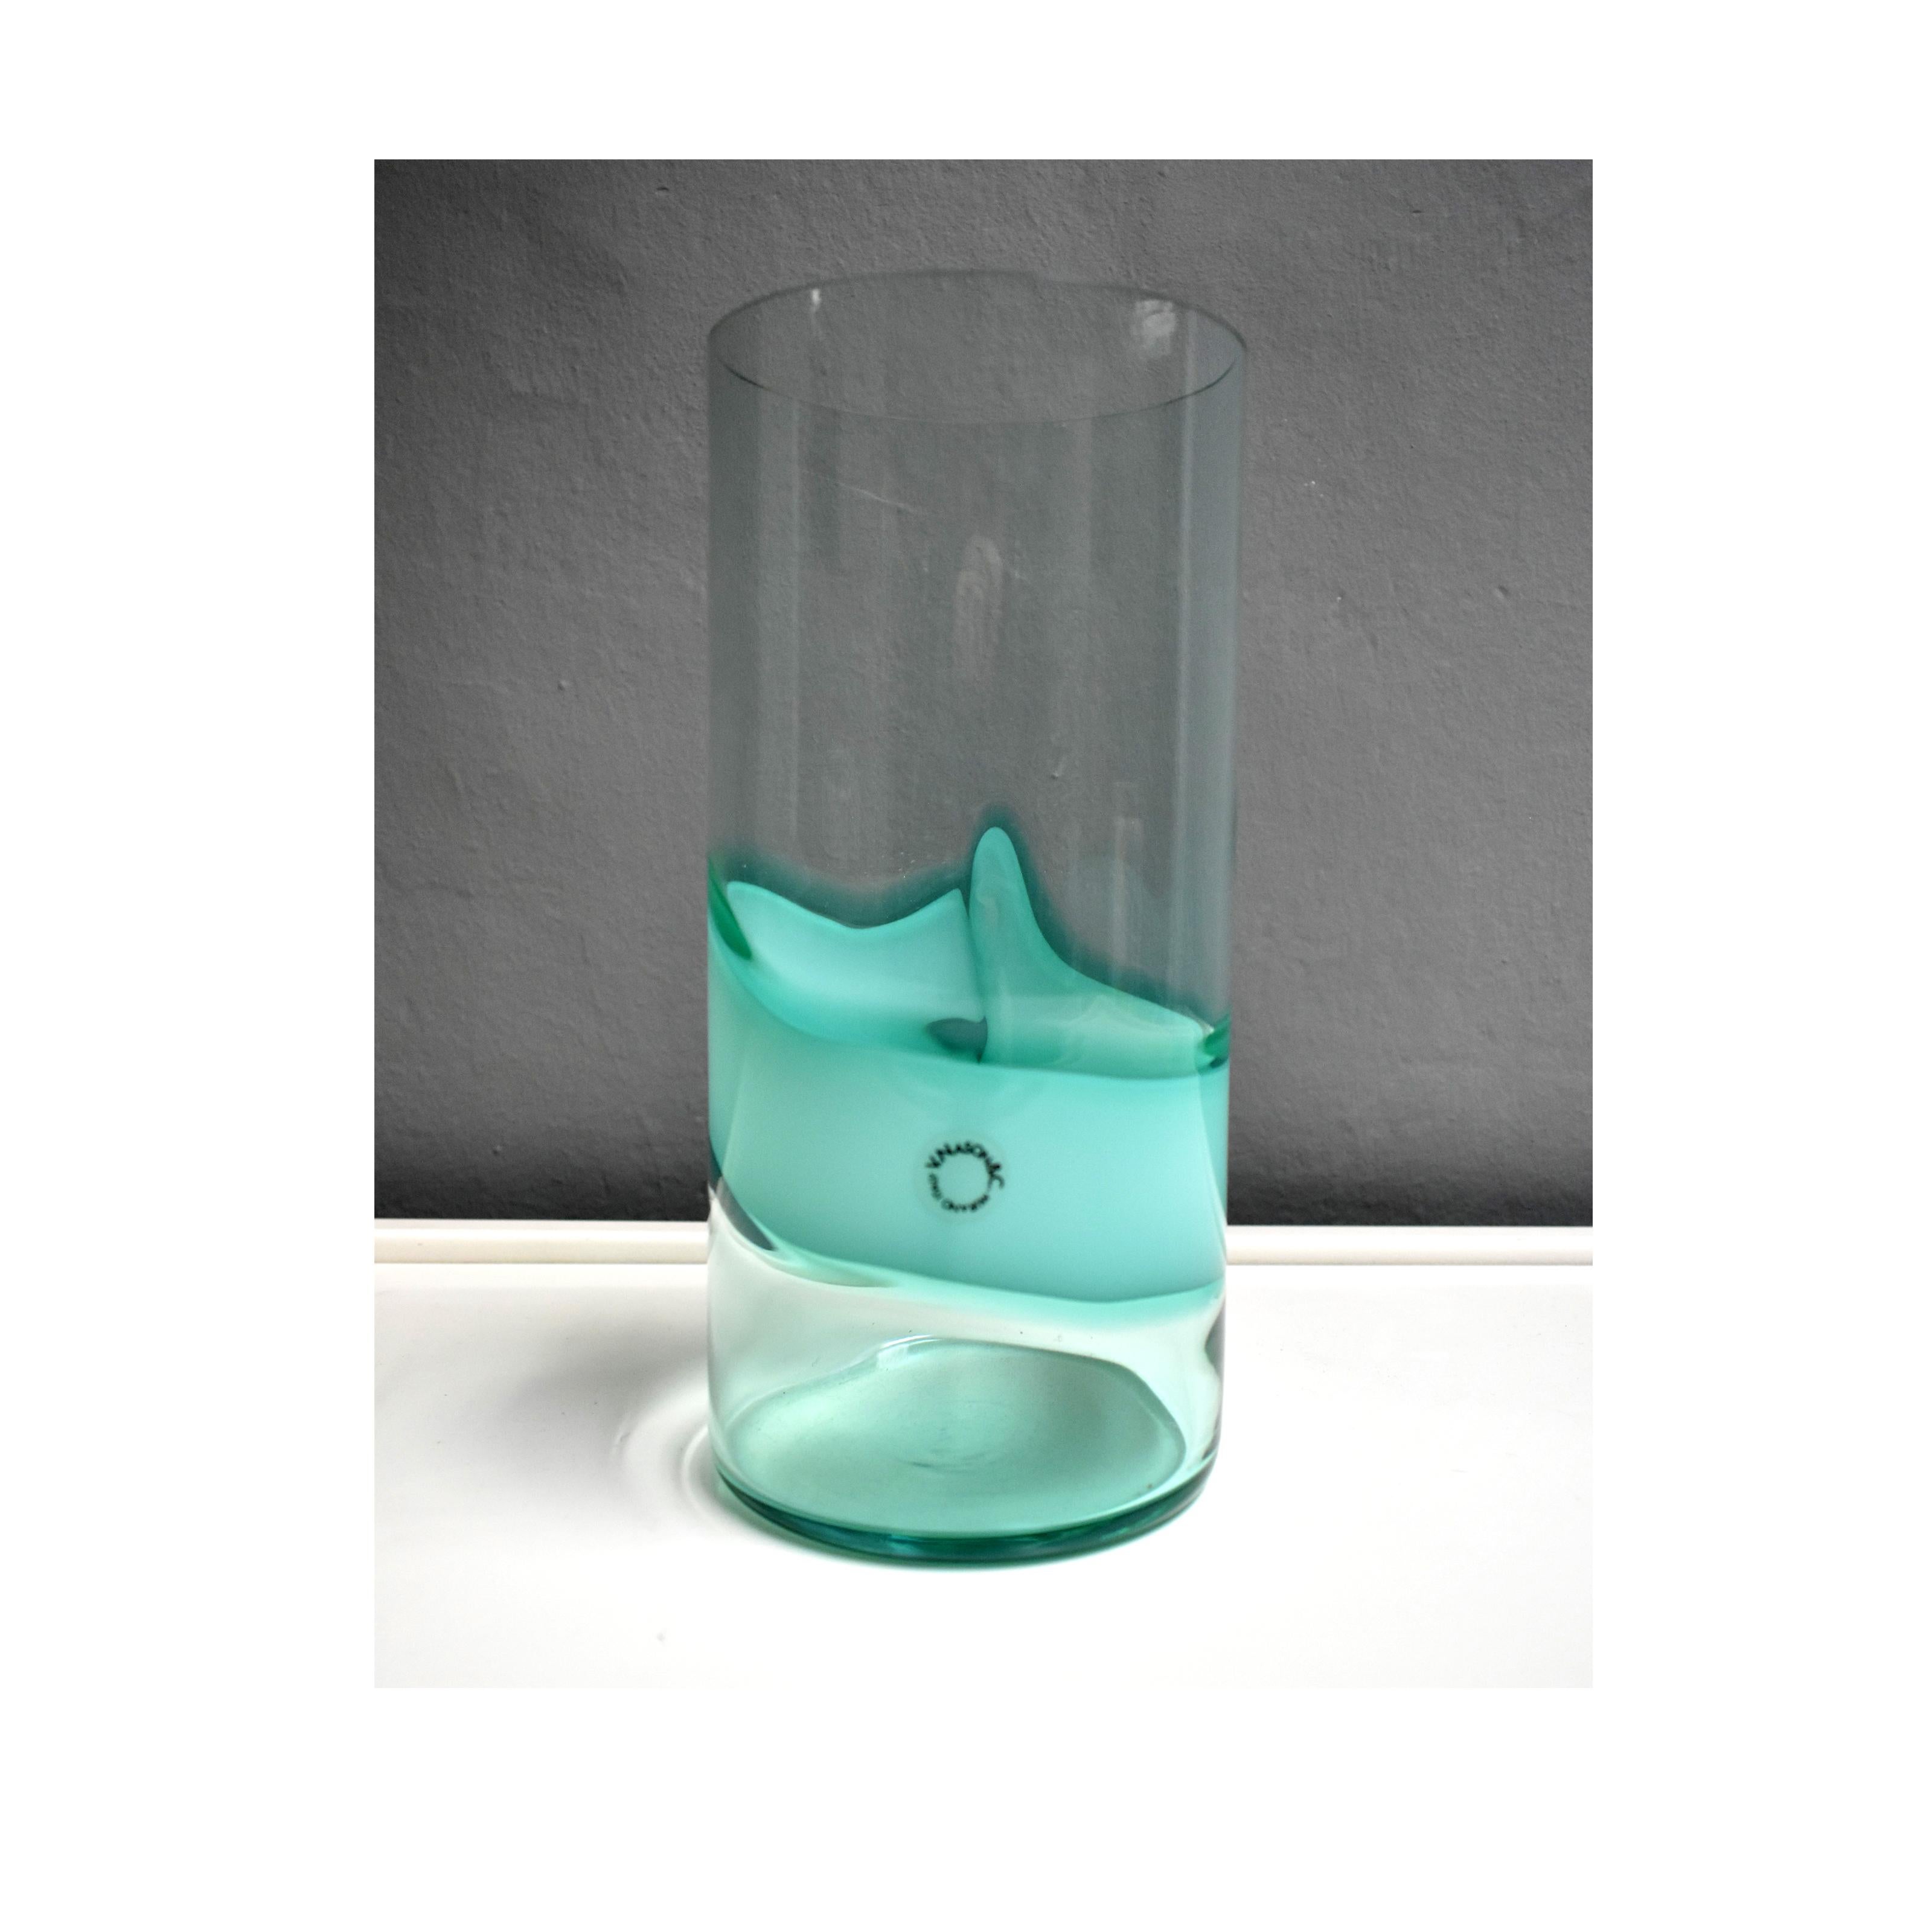 Murano glass vase produced by V.Nason & C
The cylindrical vase in transparent glass and sea water blue has a design on which the authenticity mark is still present
Measures
Dimeter 12cm x 26cm Height
Very Good condition.